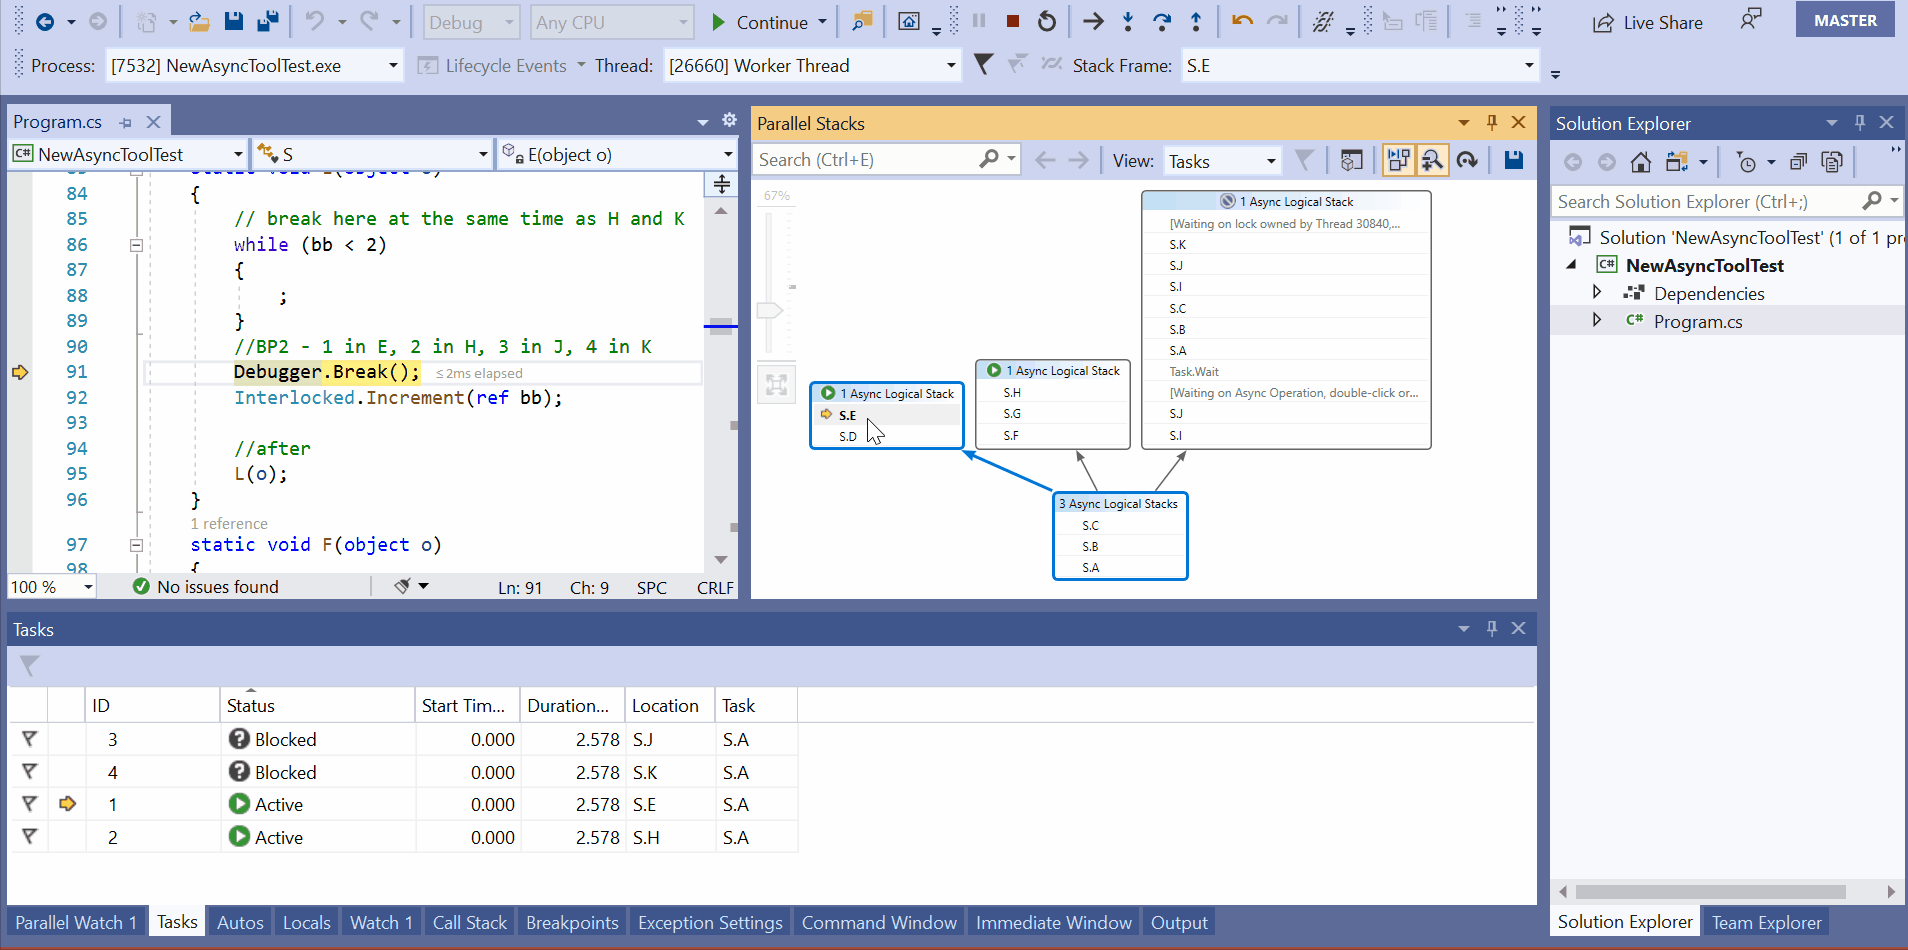 Swap between threads and tasks in Parallel Stacks